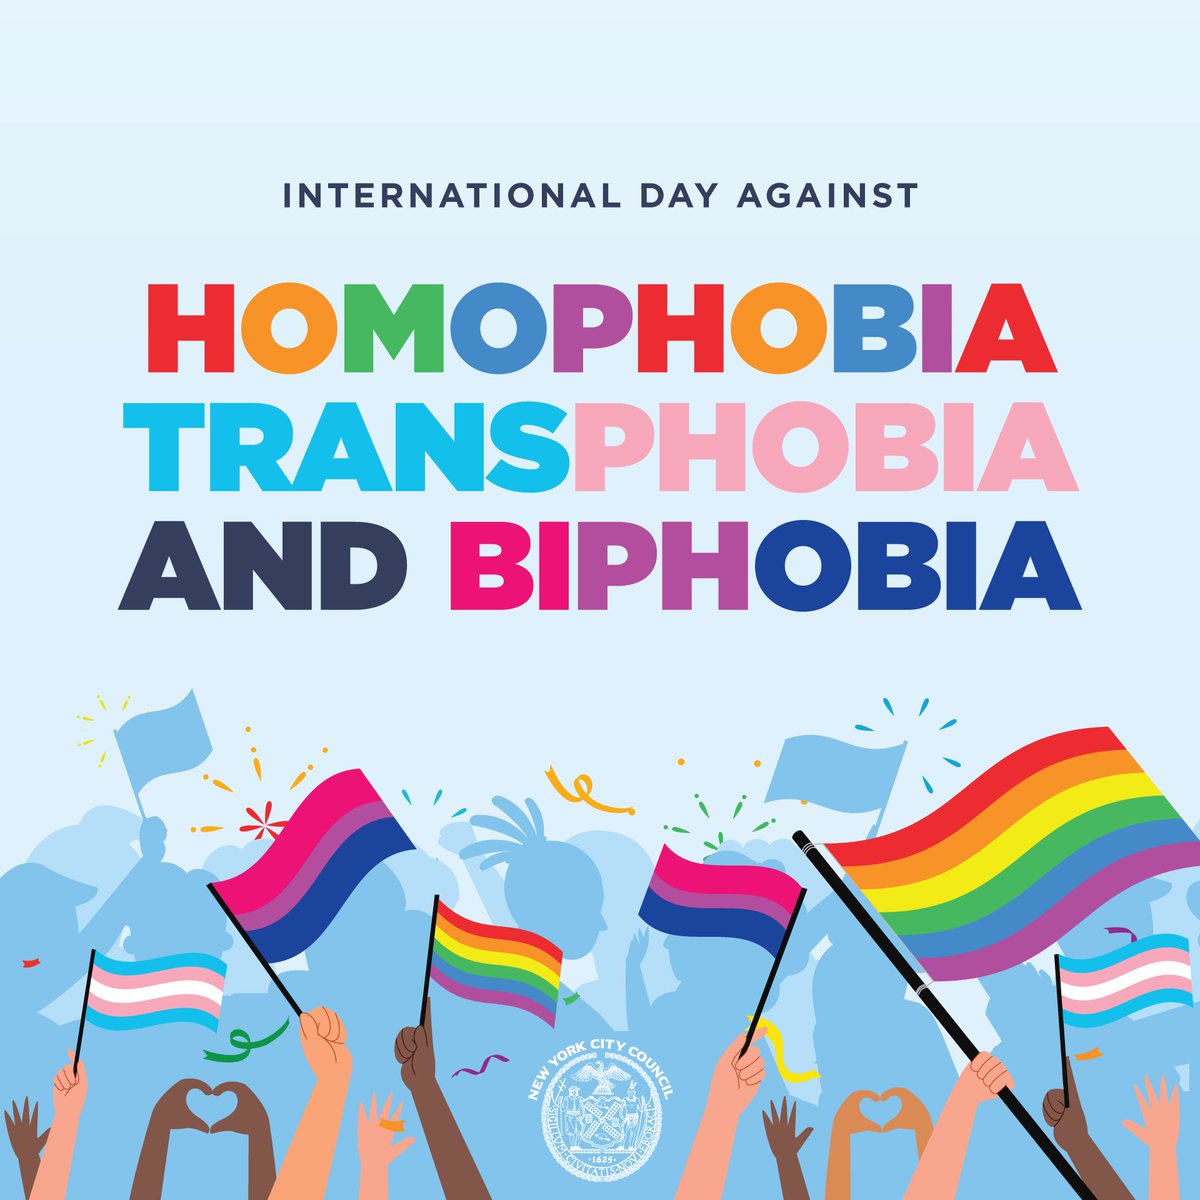 New York City is for everyone. On International Day Against Homophobia, Transphobia, and Biphobia, we stand in solidarity with LGBTQIA+ New Yorkers and recommit ourselves to ensuring that NYC remains an inclusive city for all! #IDAHOTB